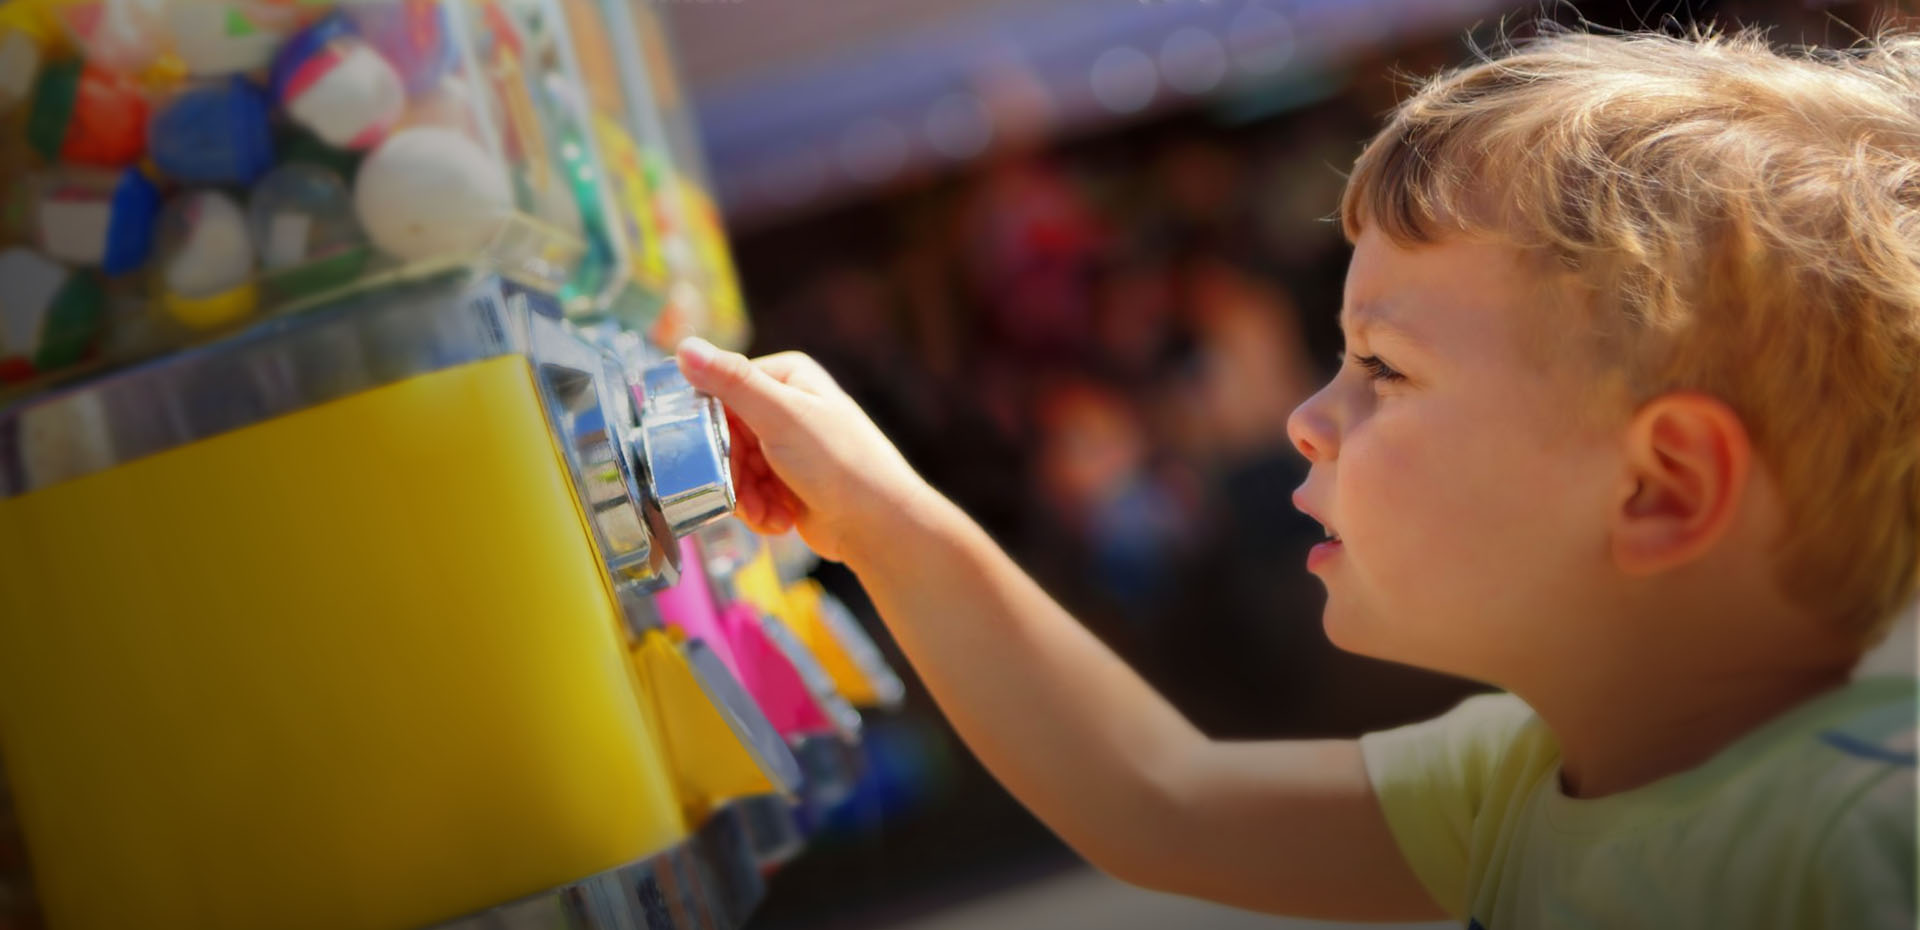 Installers Of Toys Vending Machines For Pubs Leicestershire